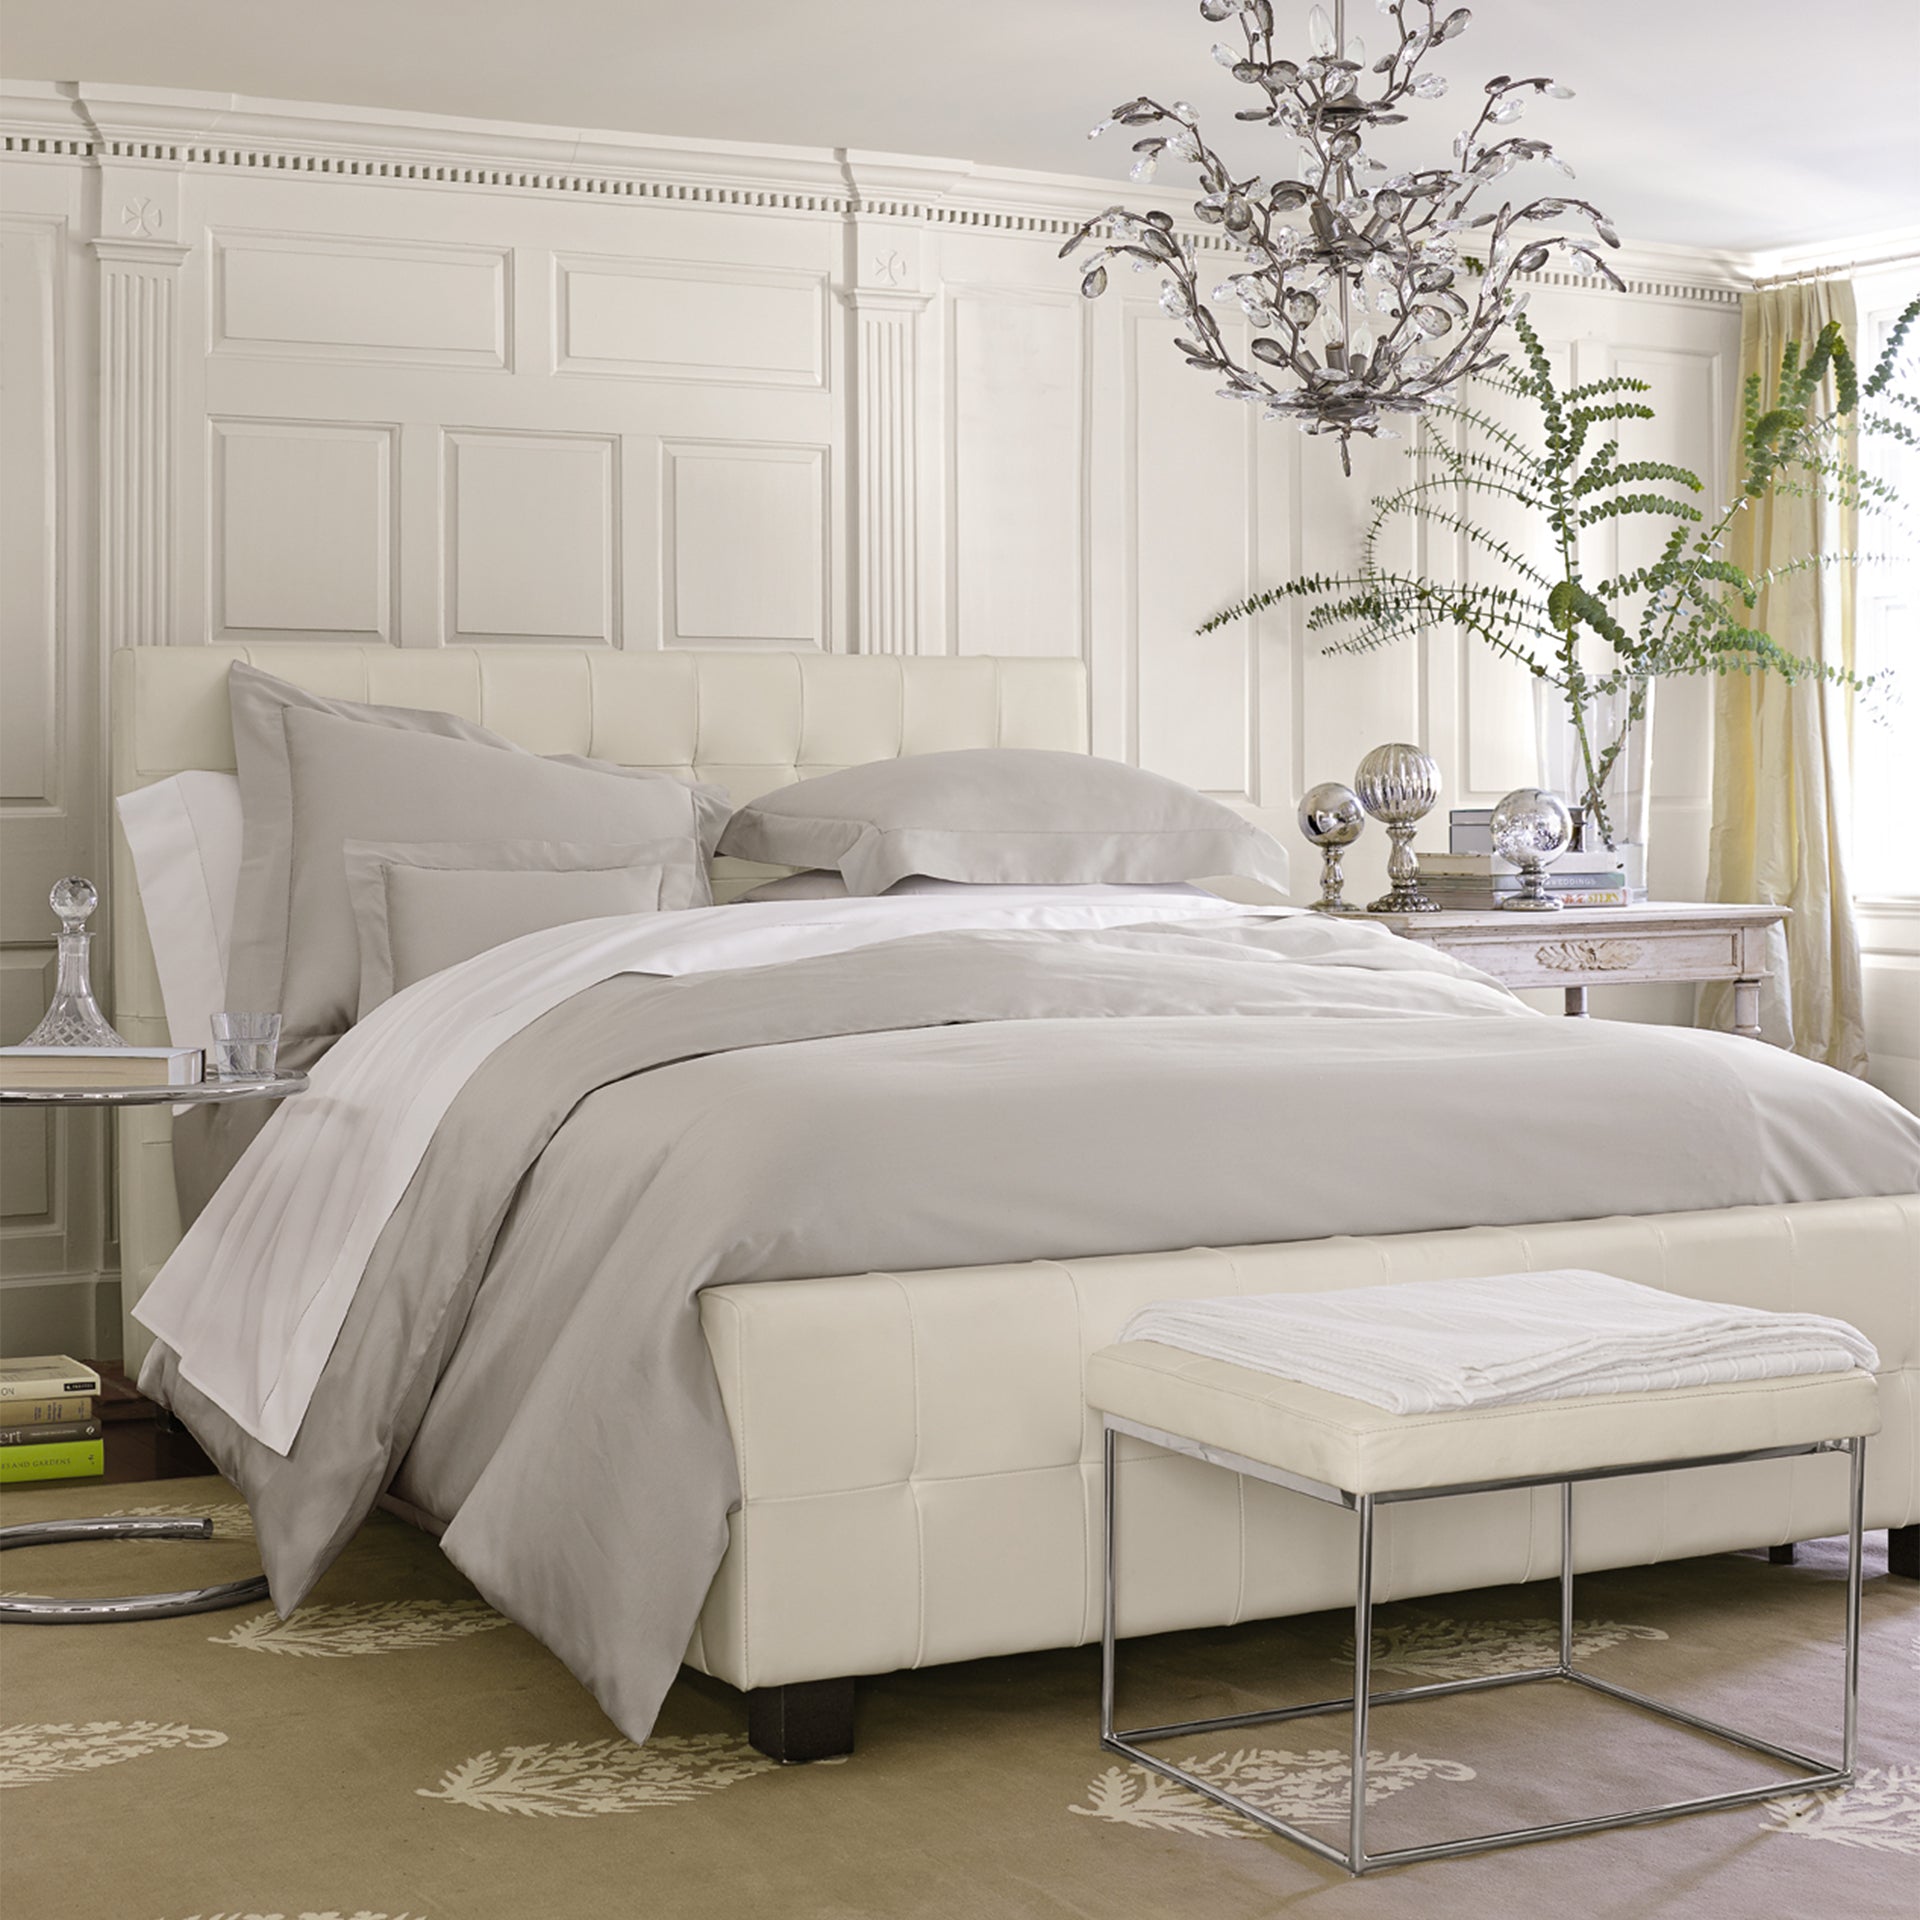 stresa sateen knife edge duvet cover in the color shadow features a button closure and ribbon ties inside each corner 